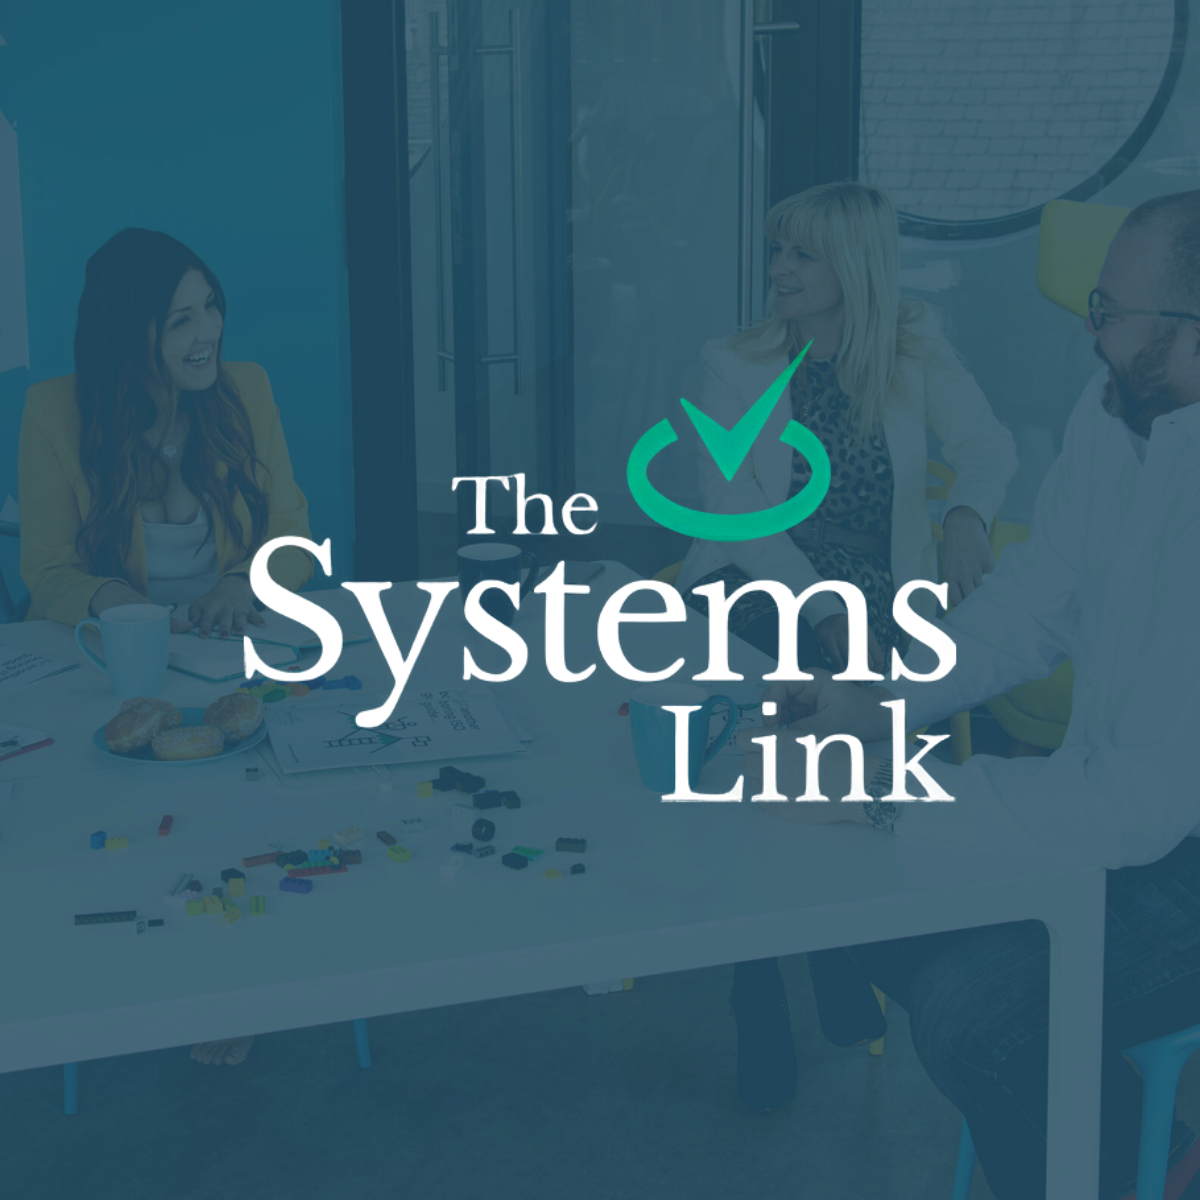 The Systems Link